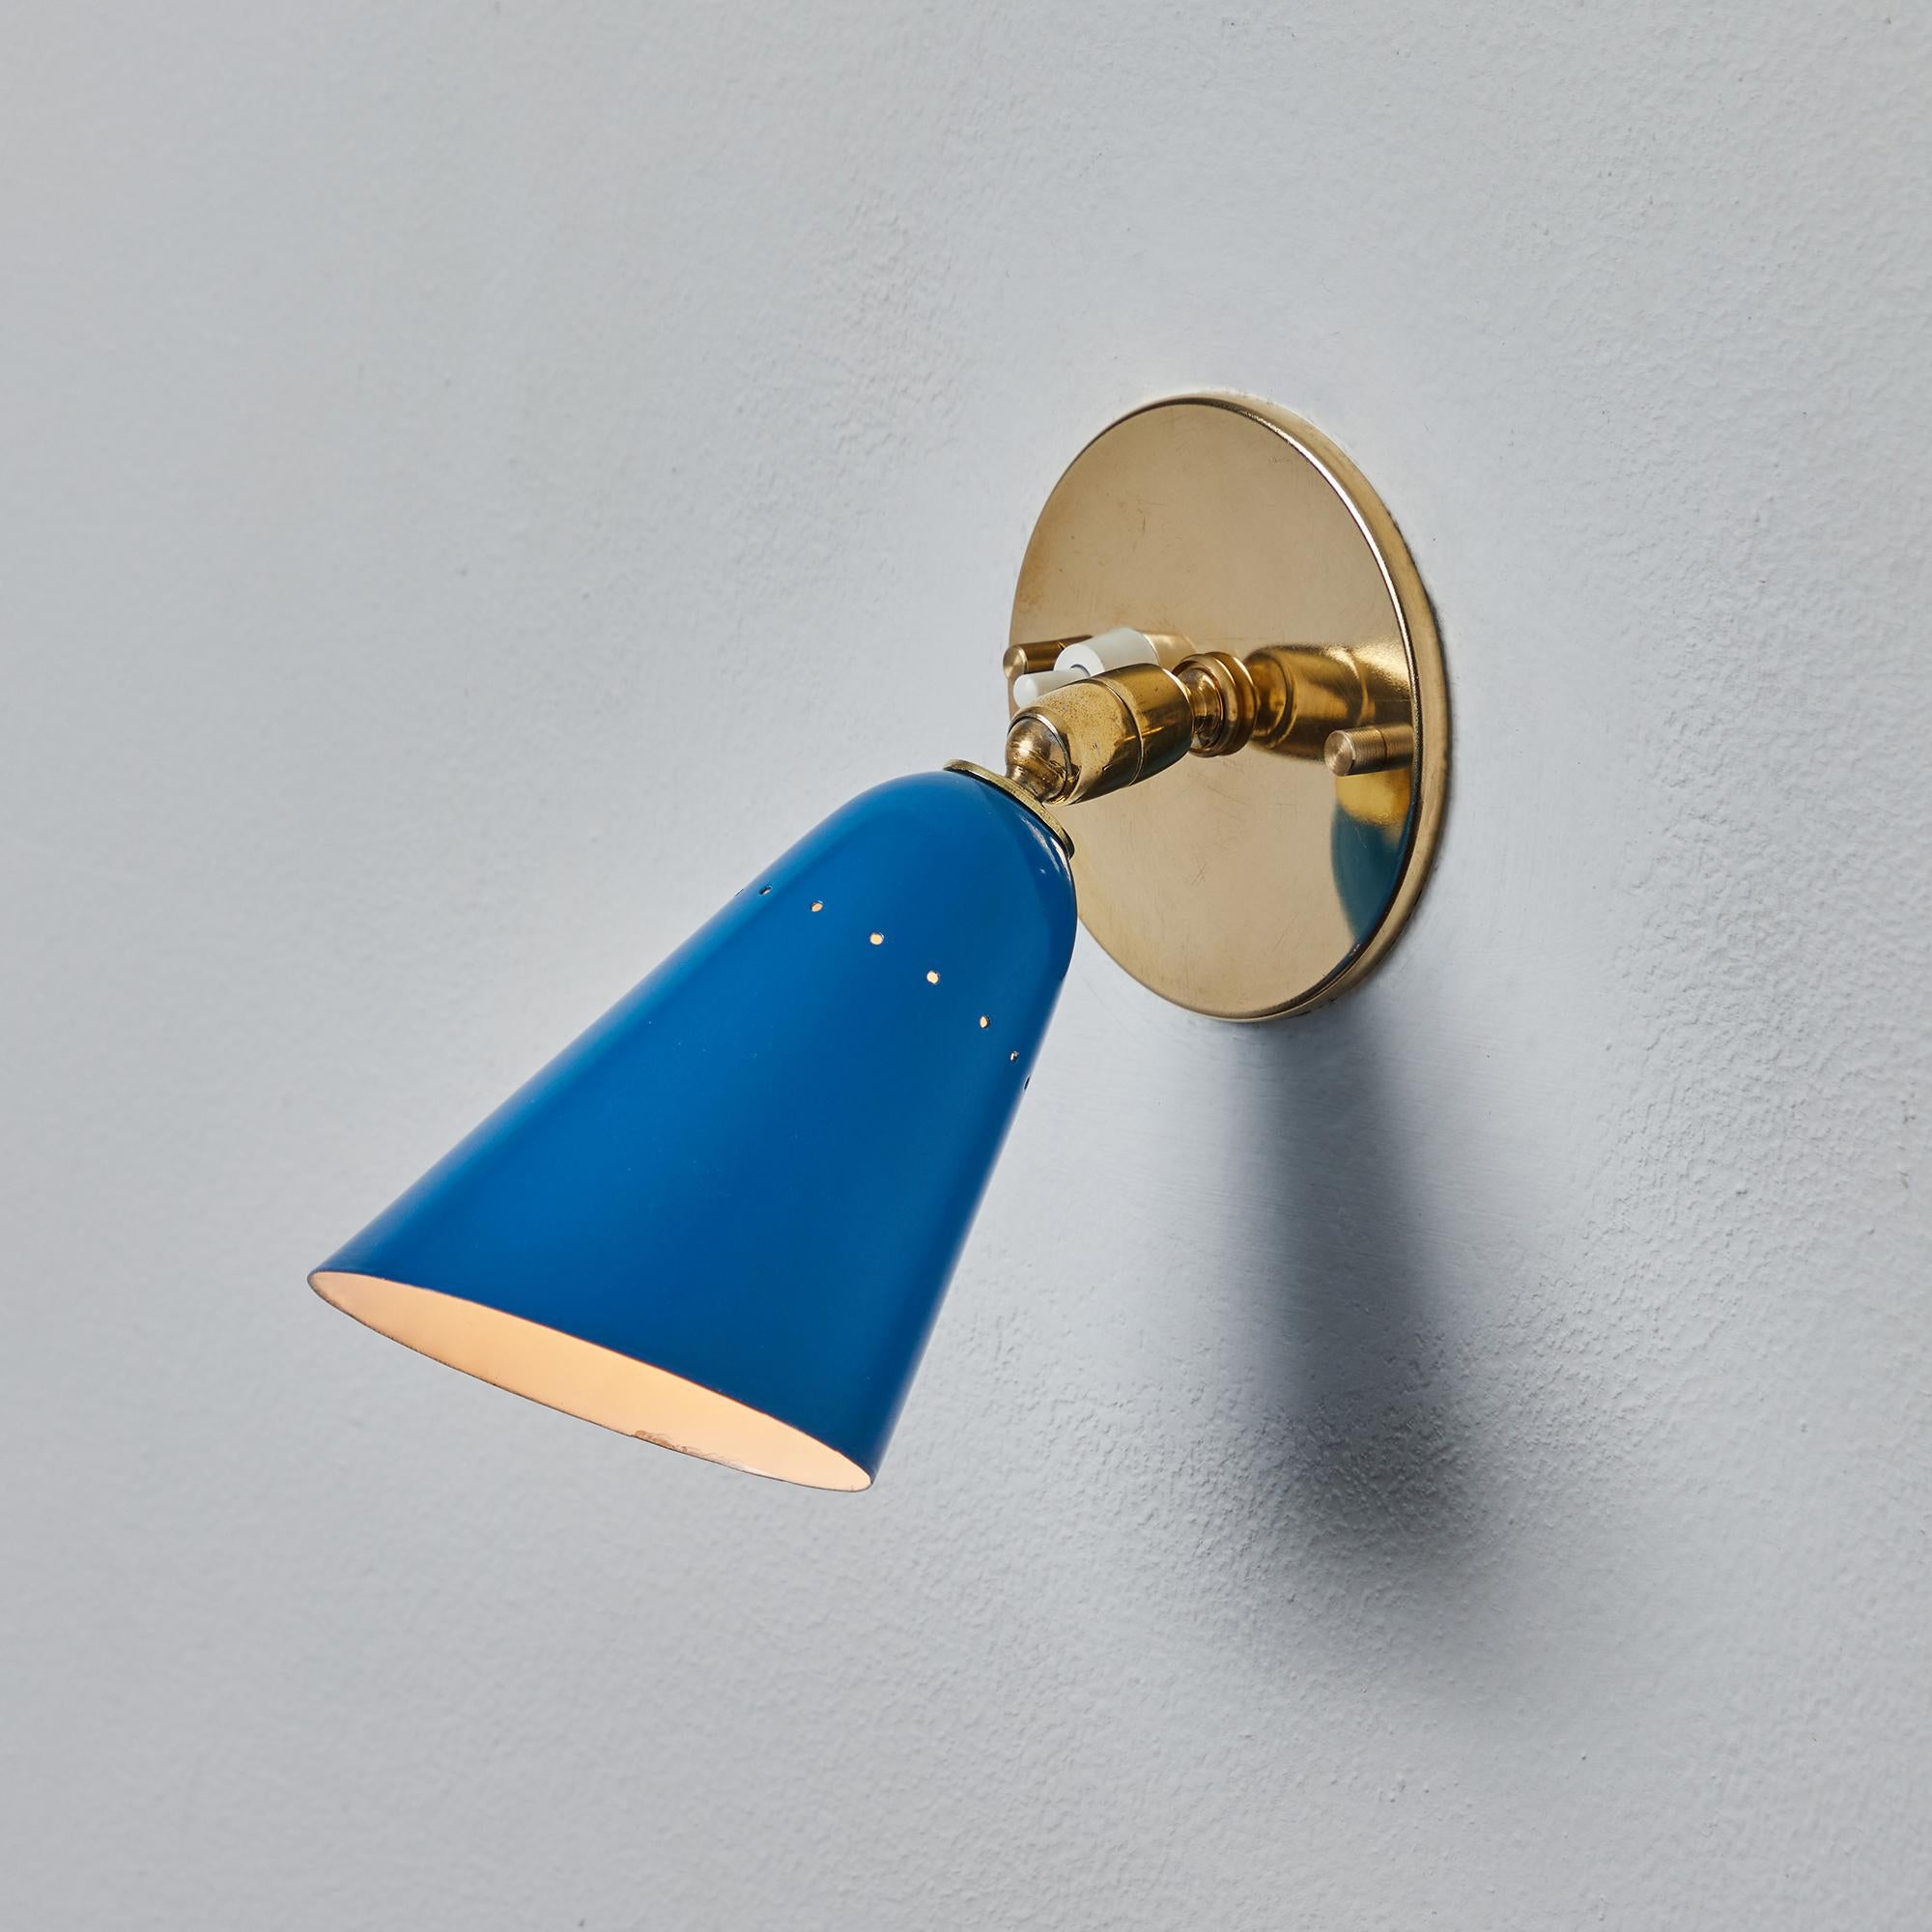 1960s Gino Sarfatti Model #26b Blue and Brass Wall Lamp for Arteluce For Sale 6